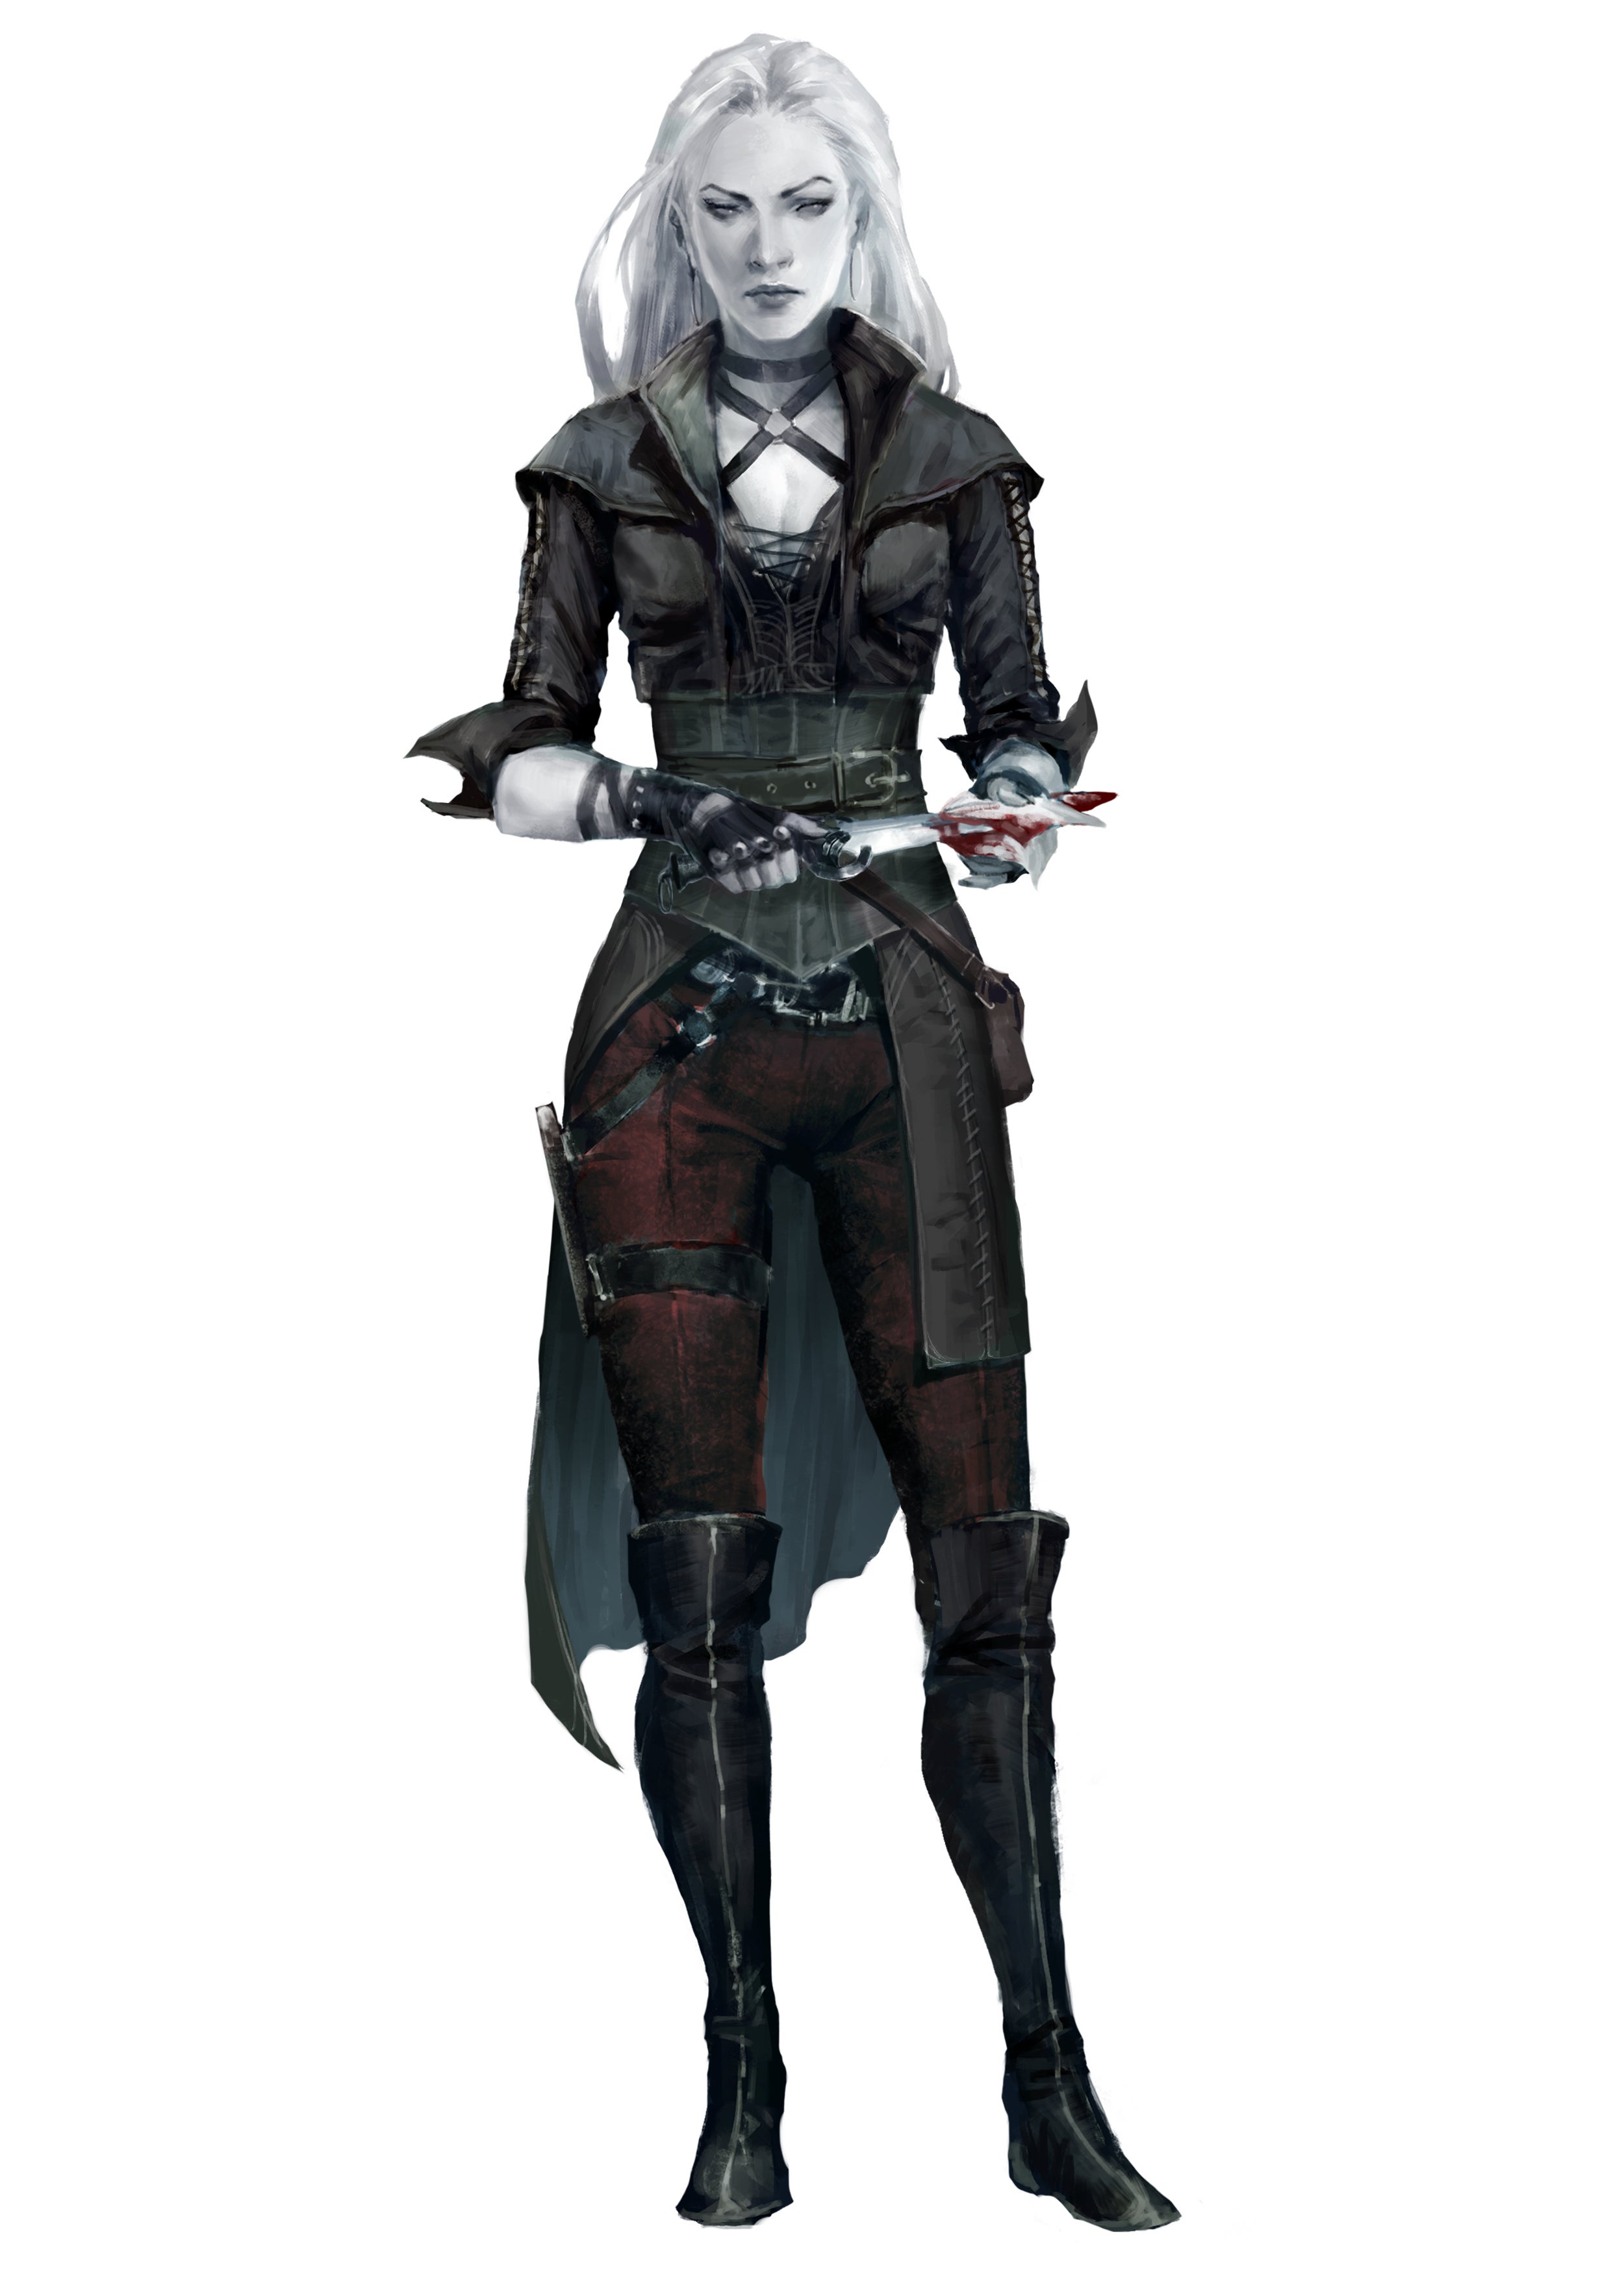 A kayal fetchling. This woman has pale, gray skin and bright, white hair. She is wearing a leather thief’s outfit and is cleaning a bloodied dagger in her hands